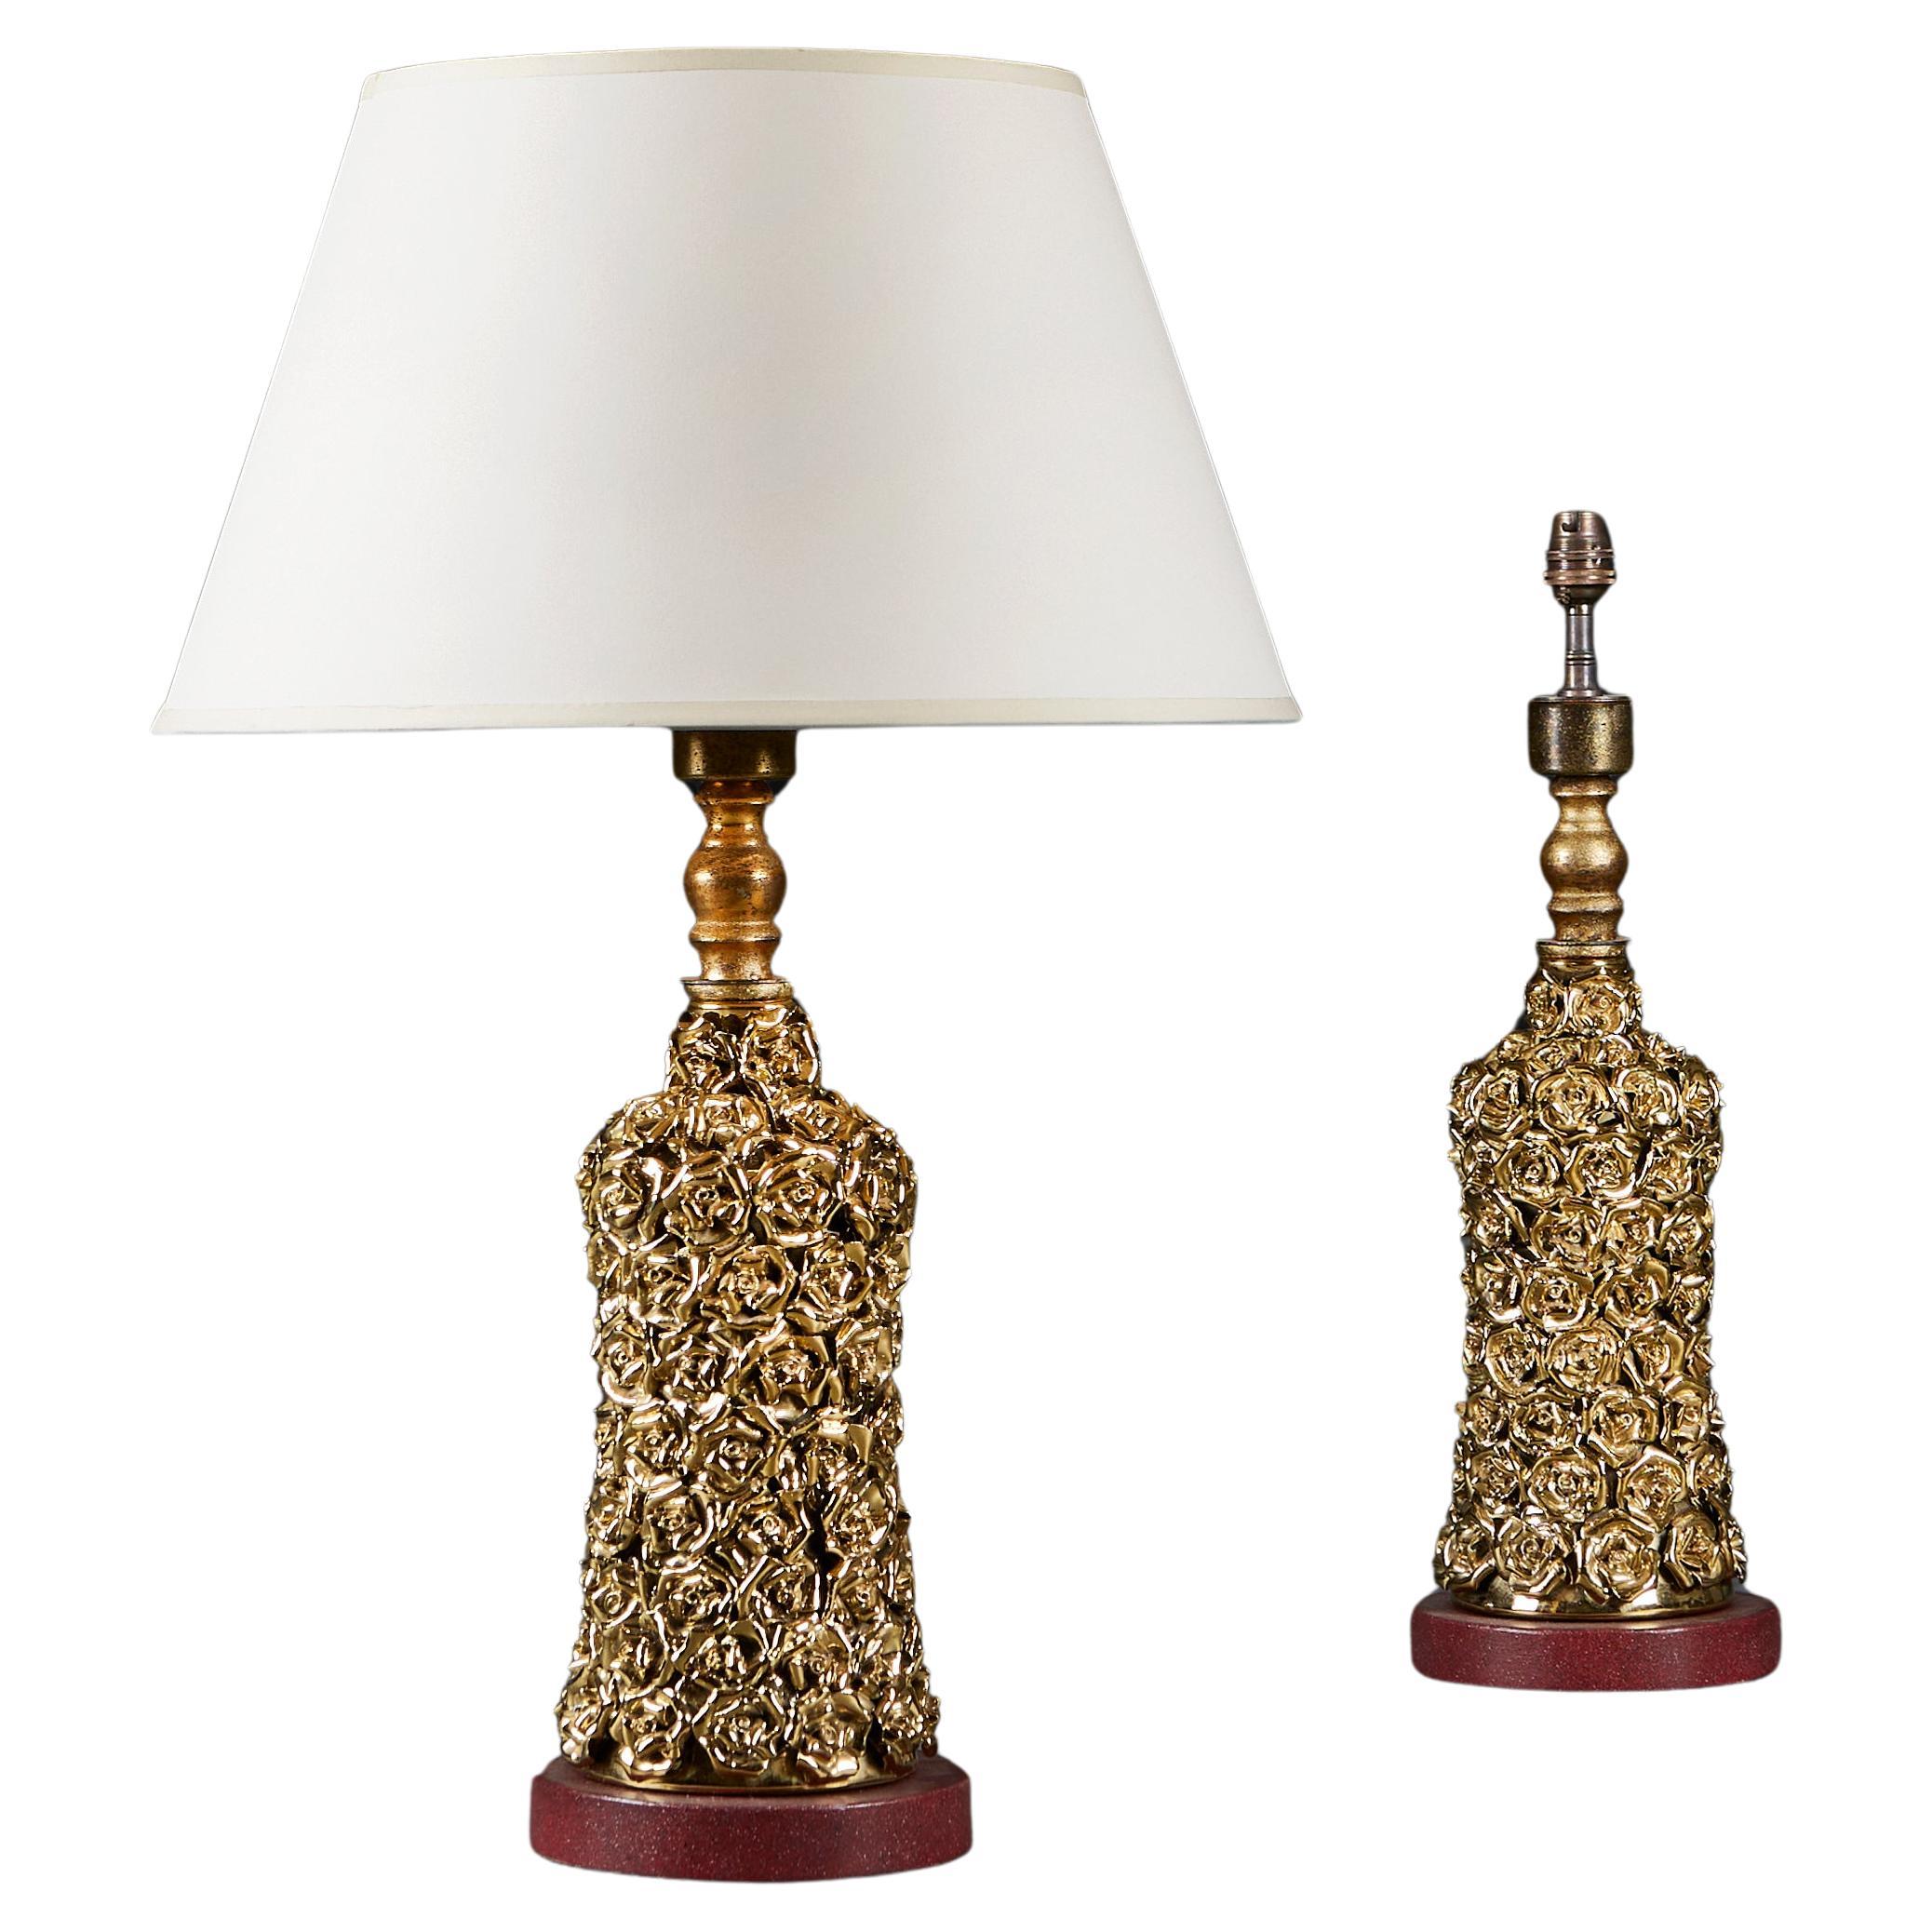 A Pair Of Hollywood Regency Gilded Porcelain Lamps  For Sale